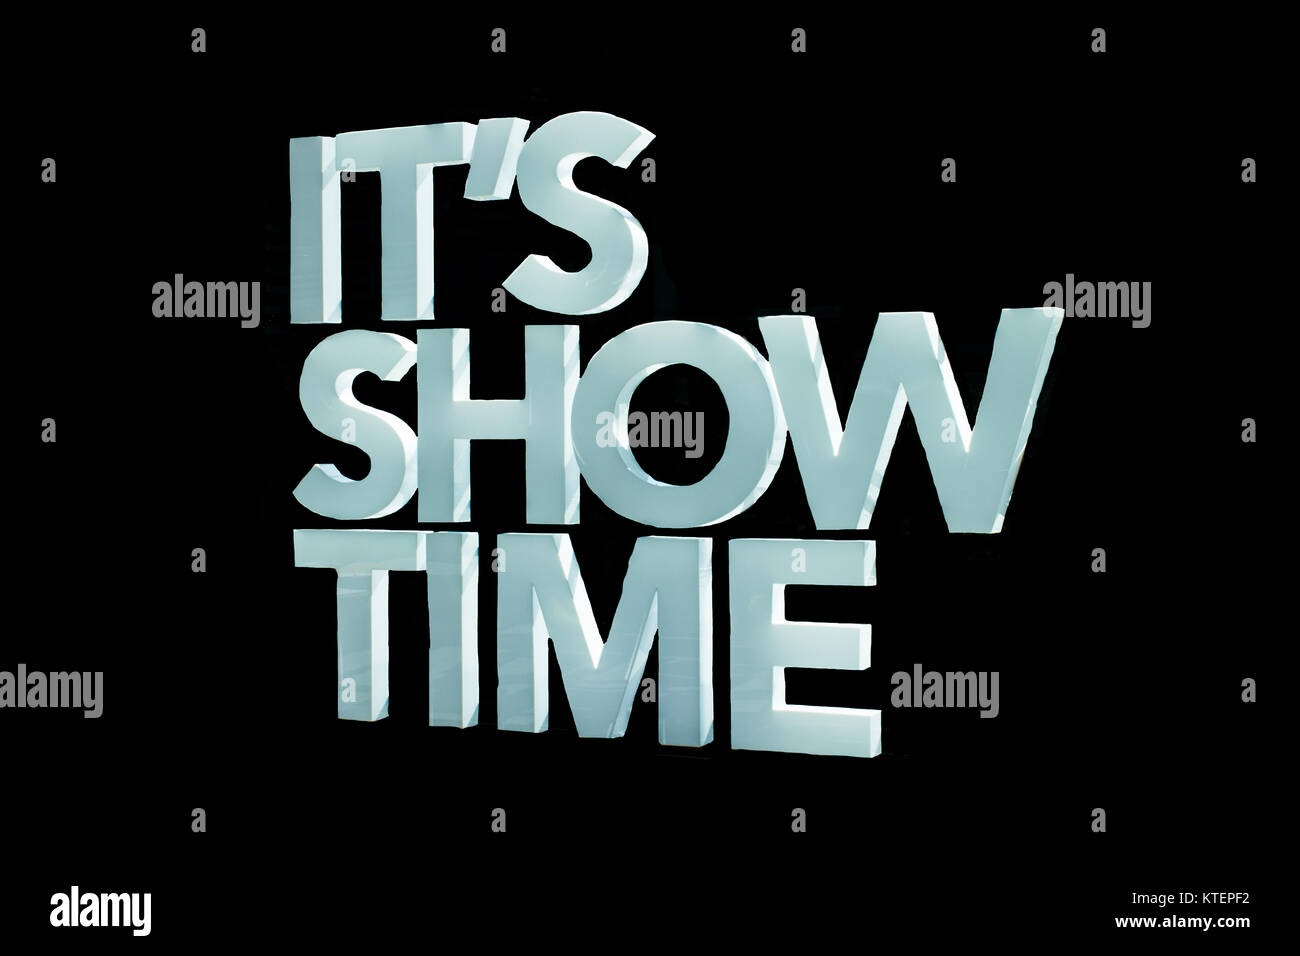 White It’s Showtime billboard sign isolated on black background Stock Photo